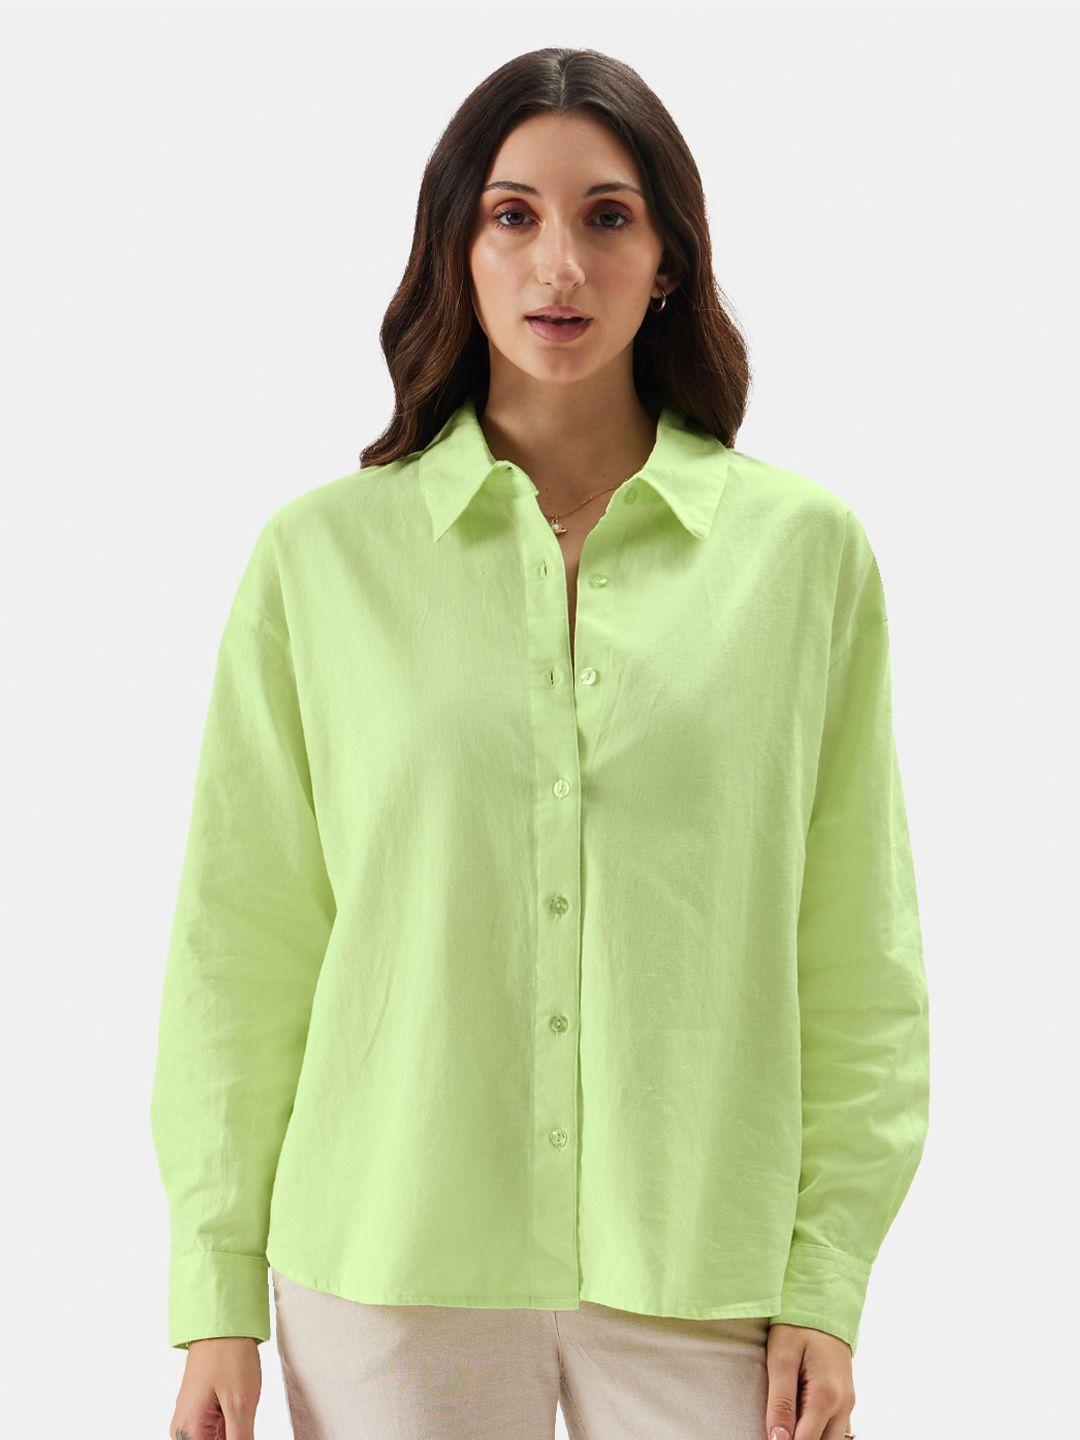 the-souled-store-lime-green-relaxed-fit-cotton-linen-casual-shirt